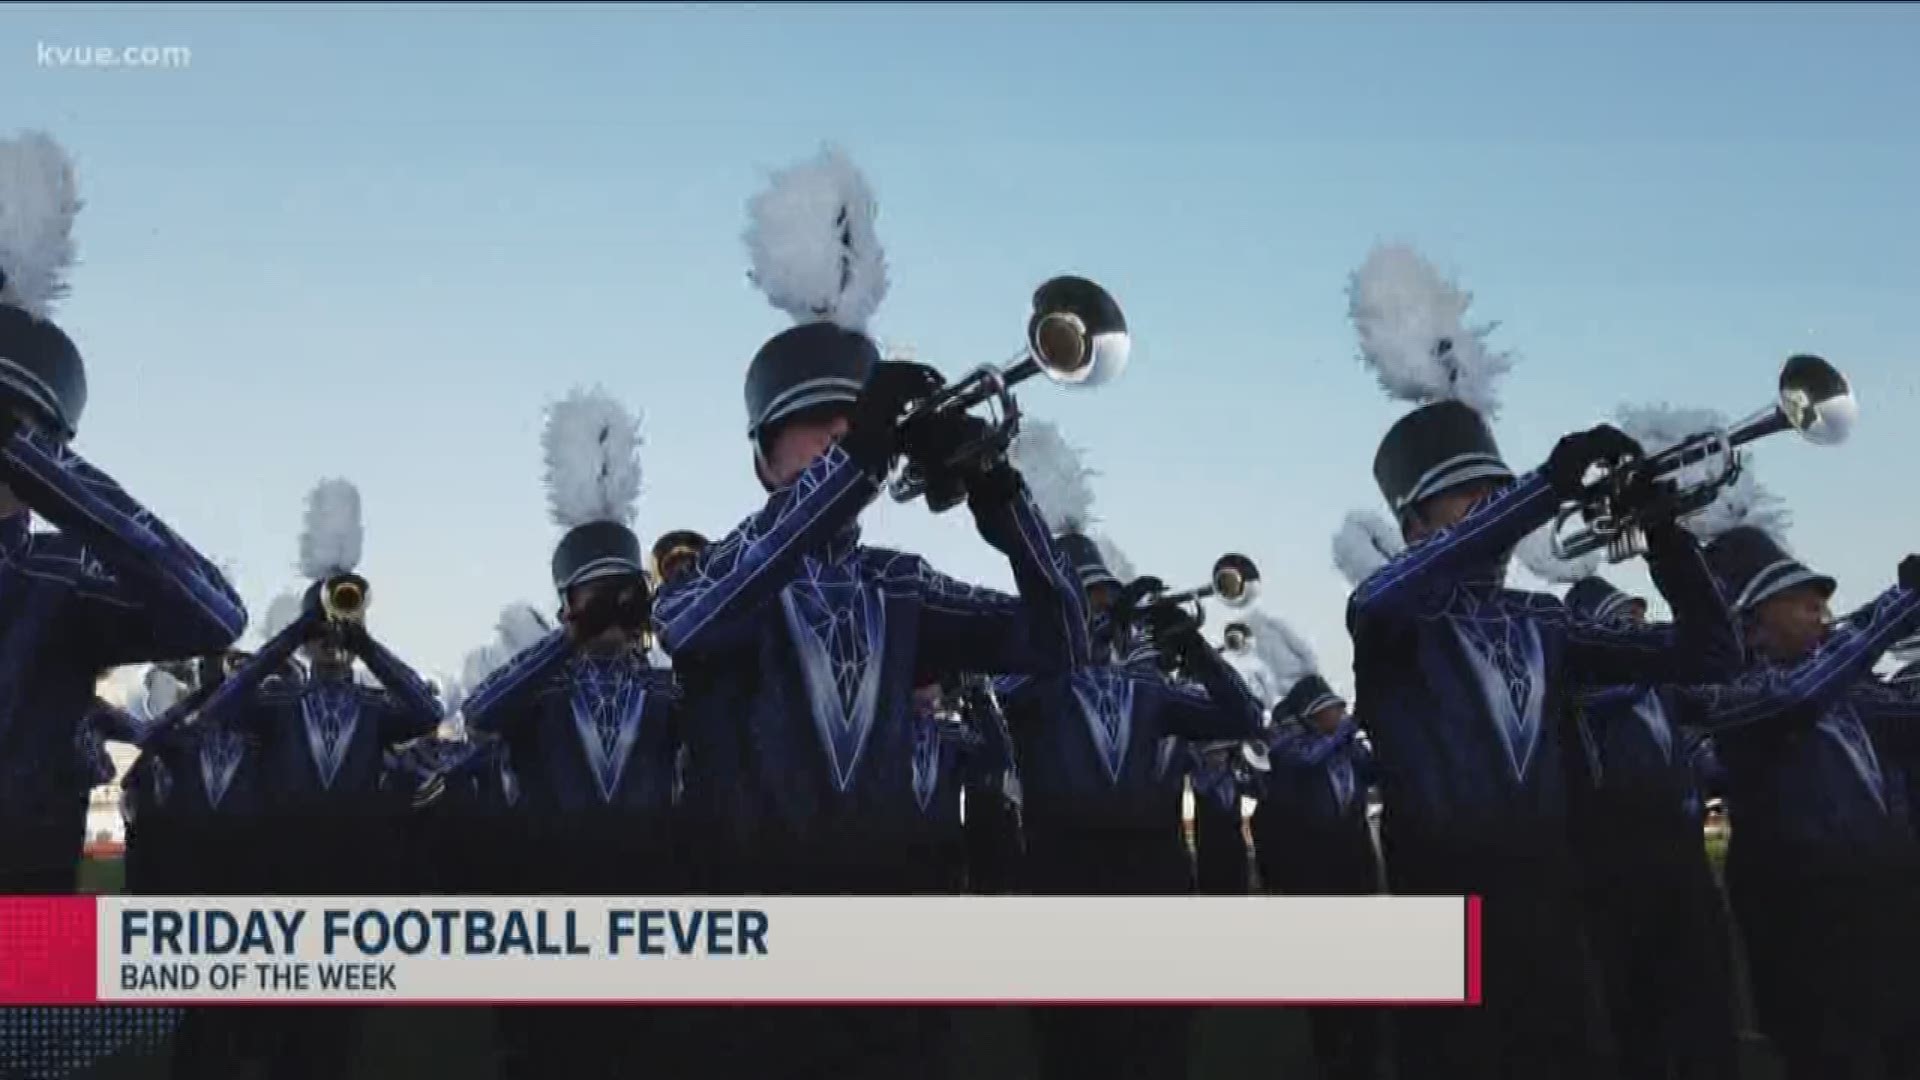 KVUE's Friday Football Fever Band of the Week for our Oct. 11 show goes to Vandegrift High School!